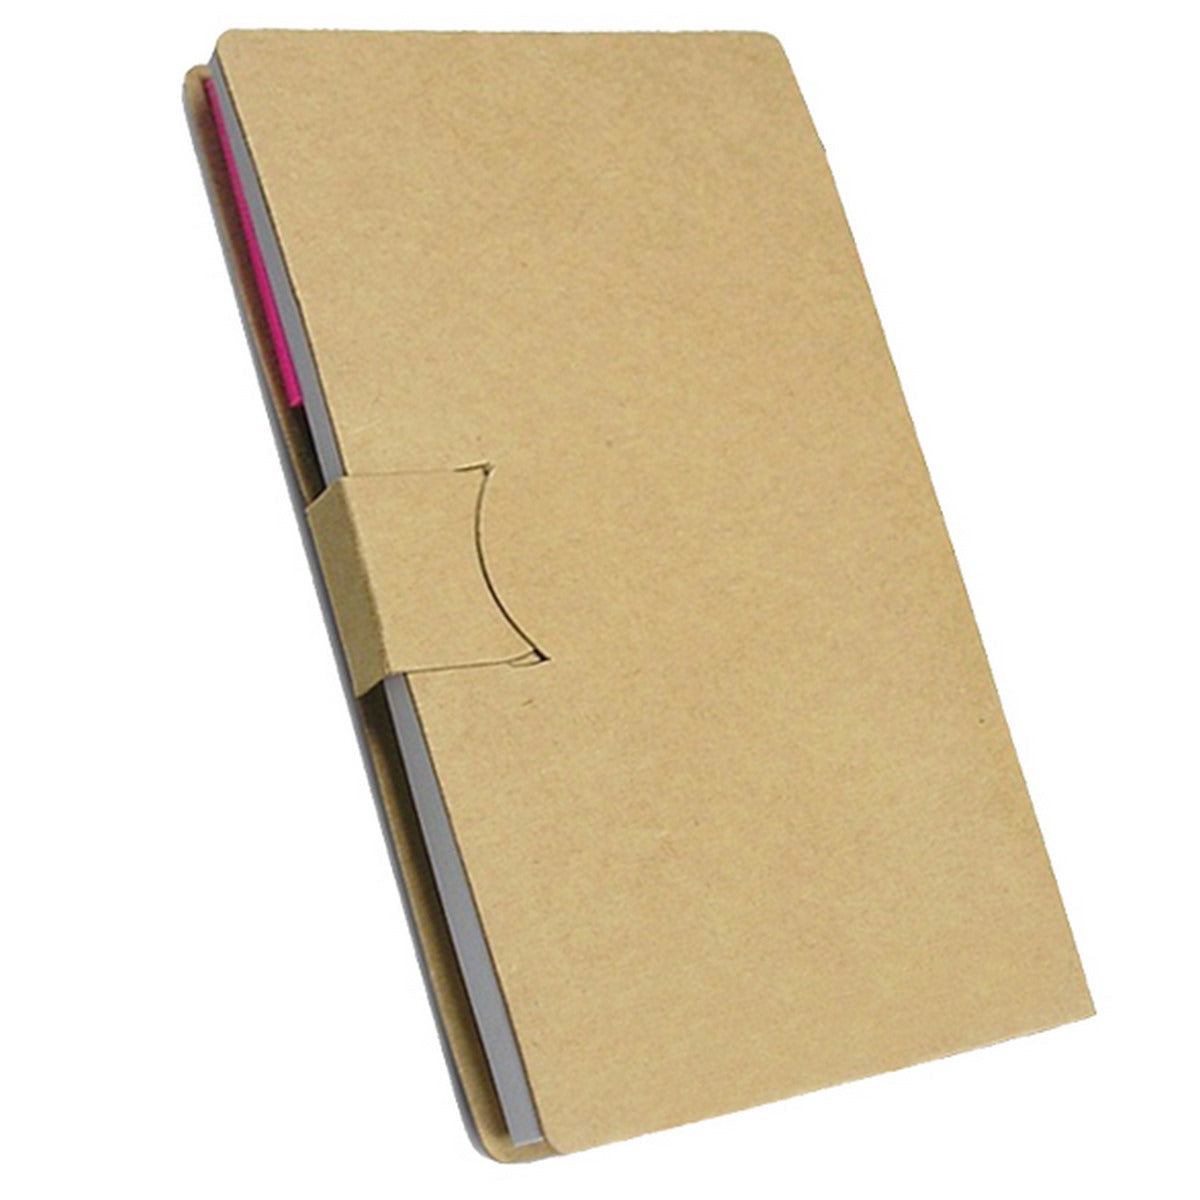 jags-mumbai Sticky Notes Memo Pad with pen and sticky notes. (Easy to carry & fold)